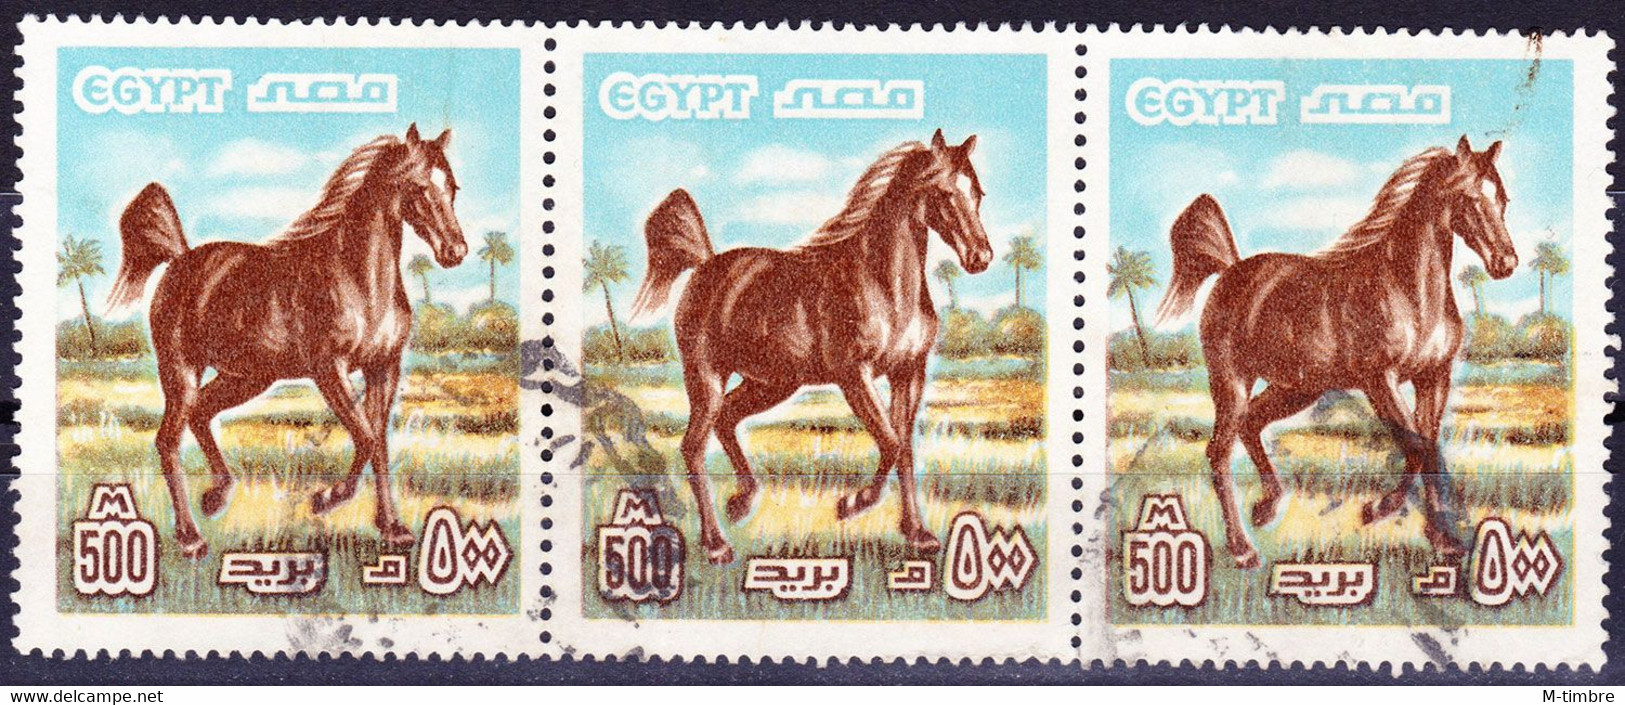 Egypte YT 1042 Mi 1277X Année 1978 (Used °) Animaux - Chevaux - Cheval - Horse - Usati